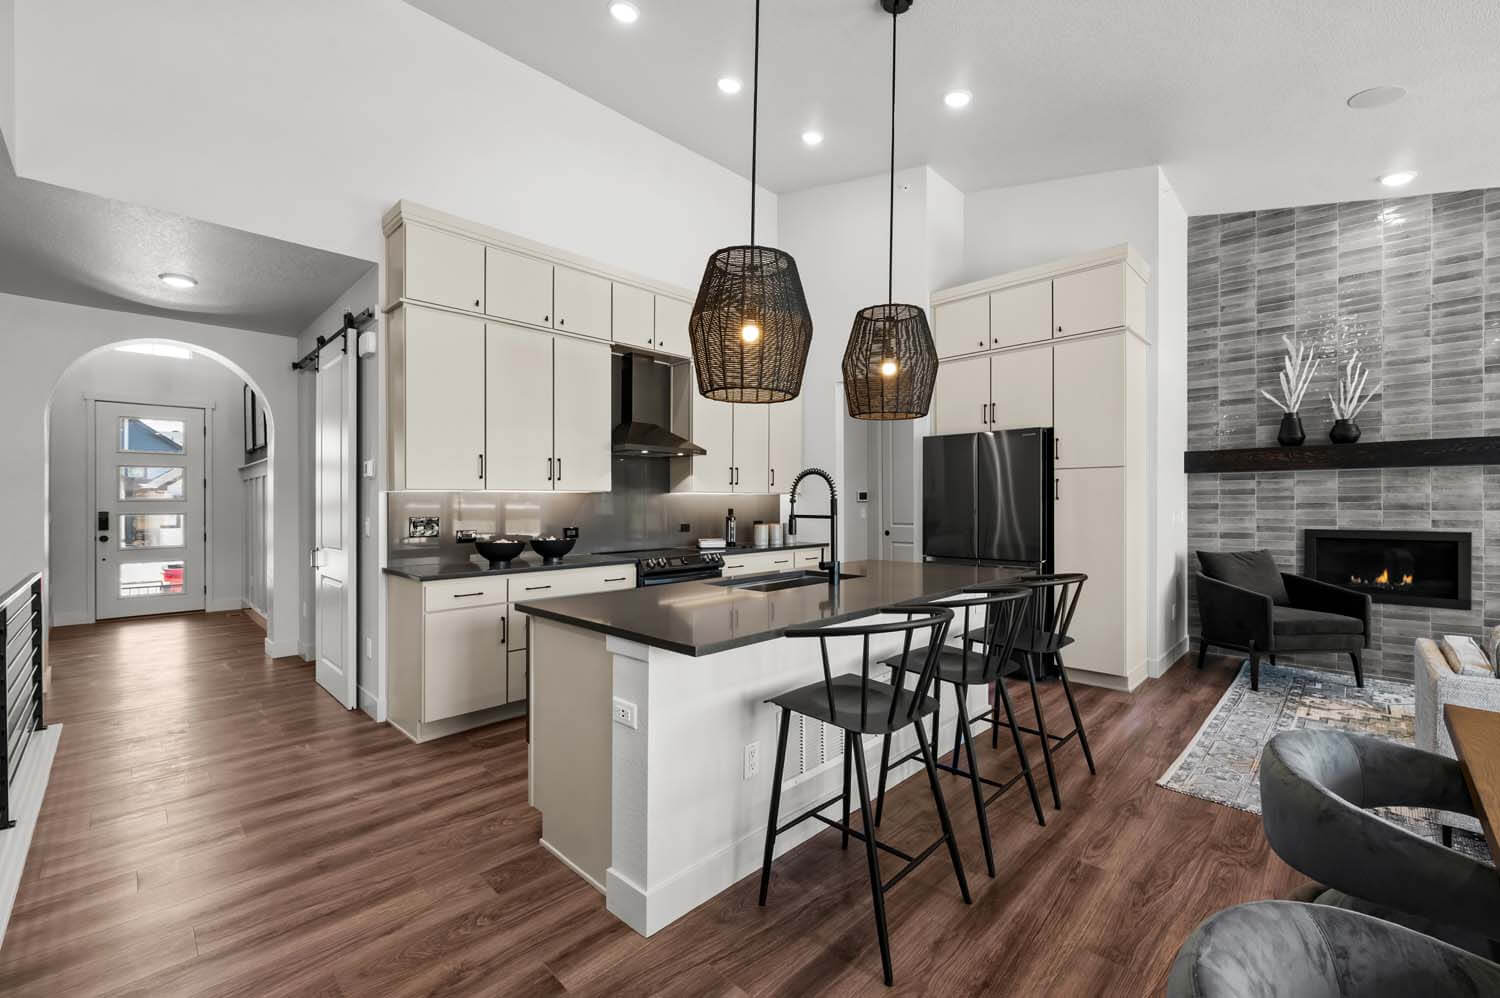 In the kitchen, there are two pendant lights above the island, dark quartz counters, beige cabinets, stainless steel appliances, and opens to a hallway leading to the foyer. The kitchen looks to the great room and dining room, and the space has a vaulted ceiling and hardwood floors.